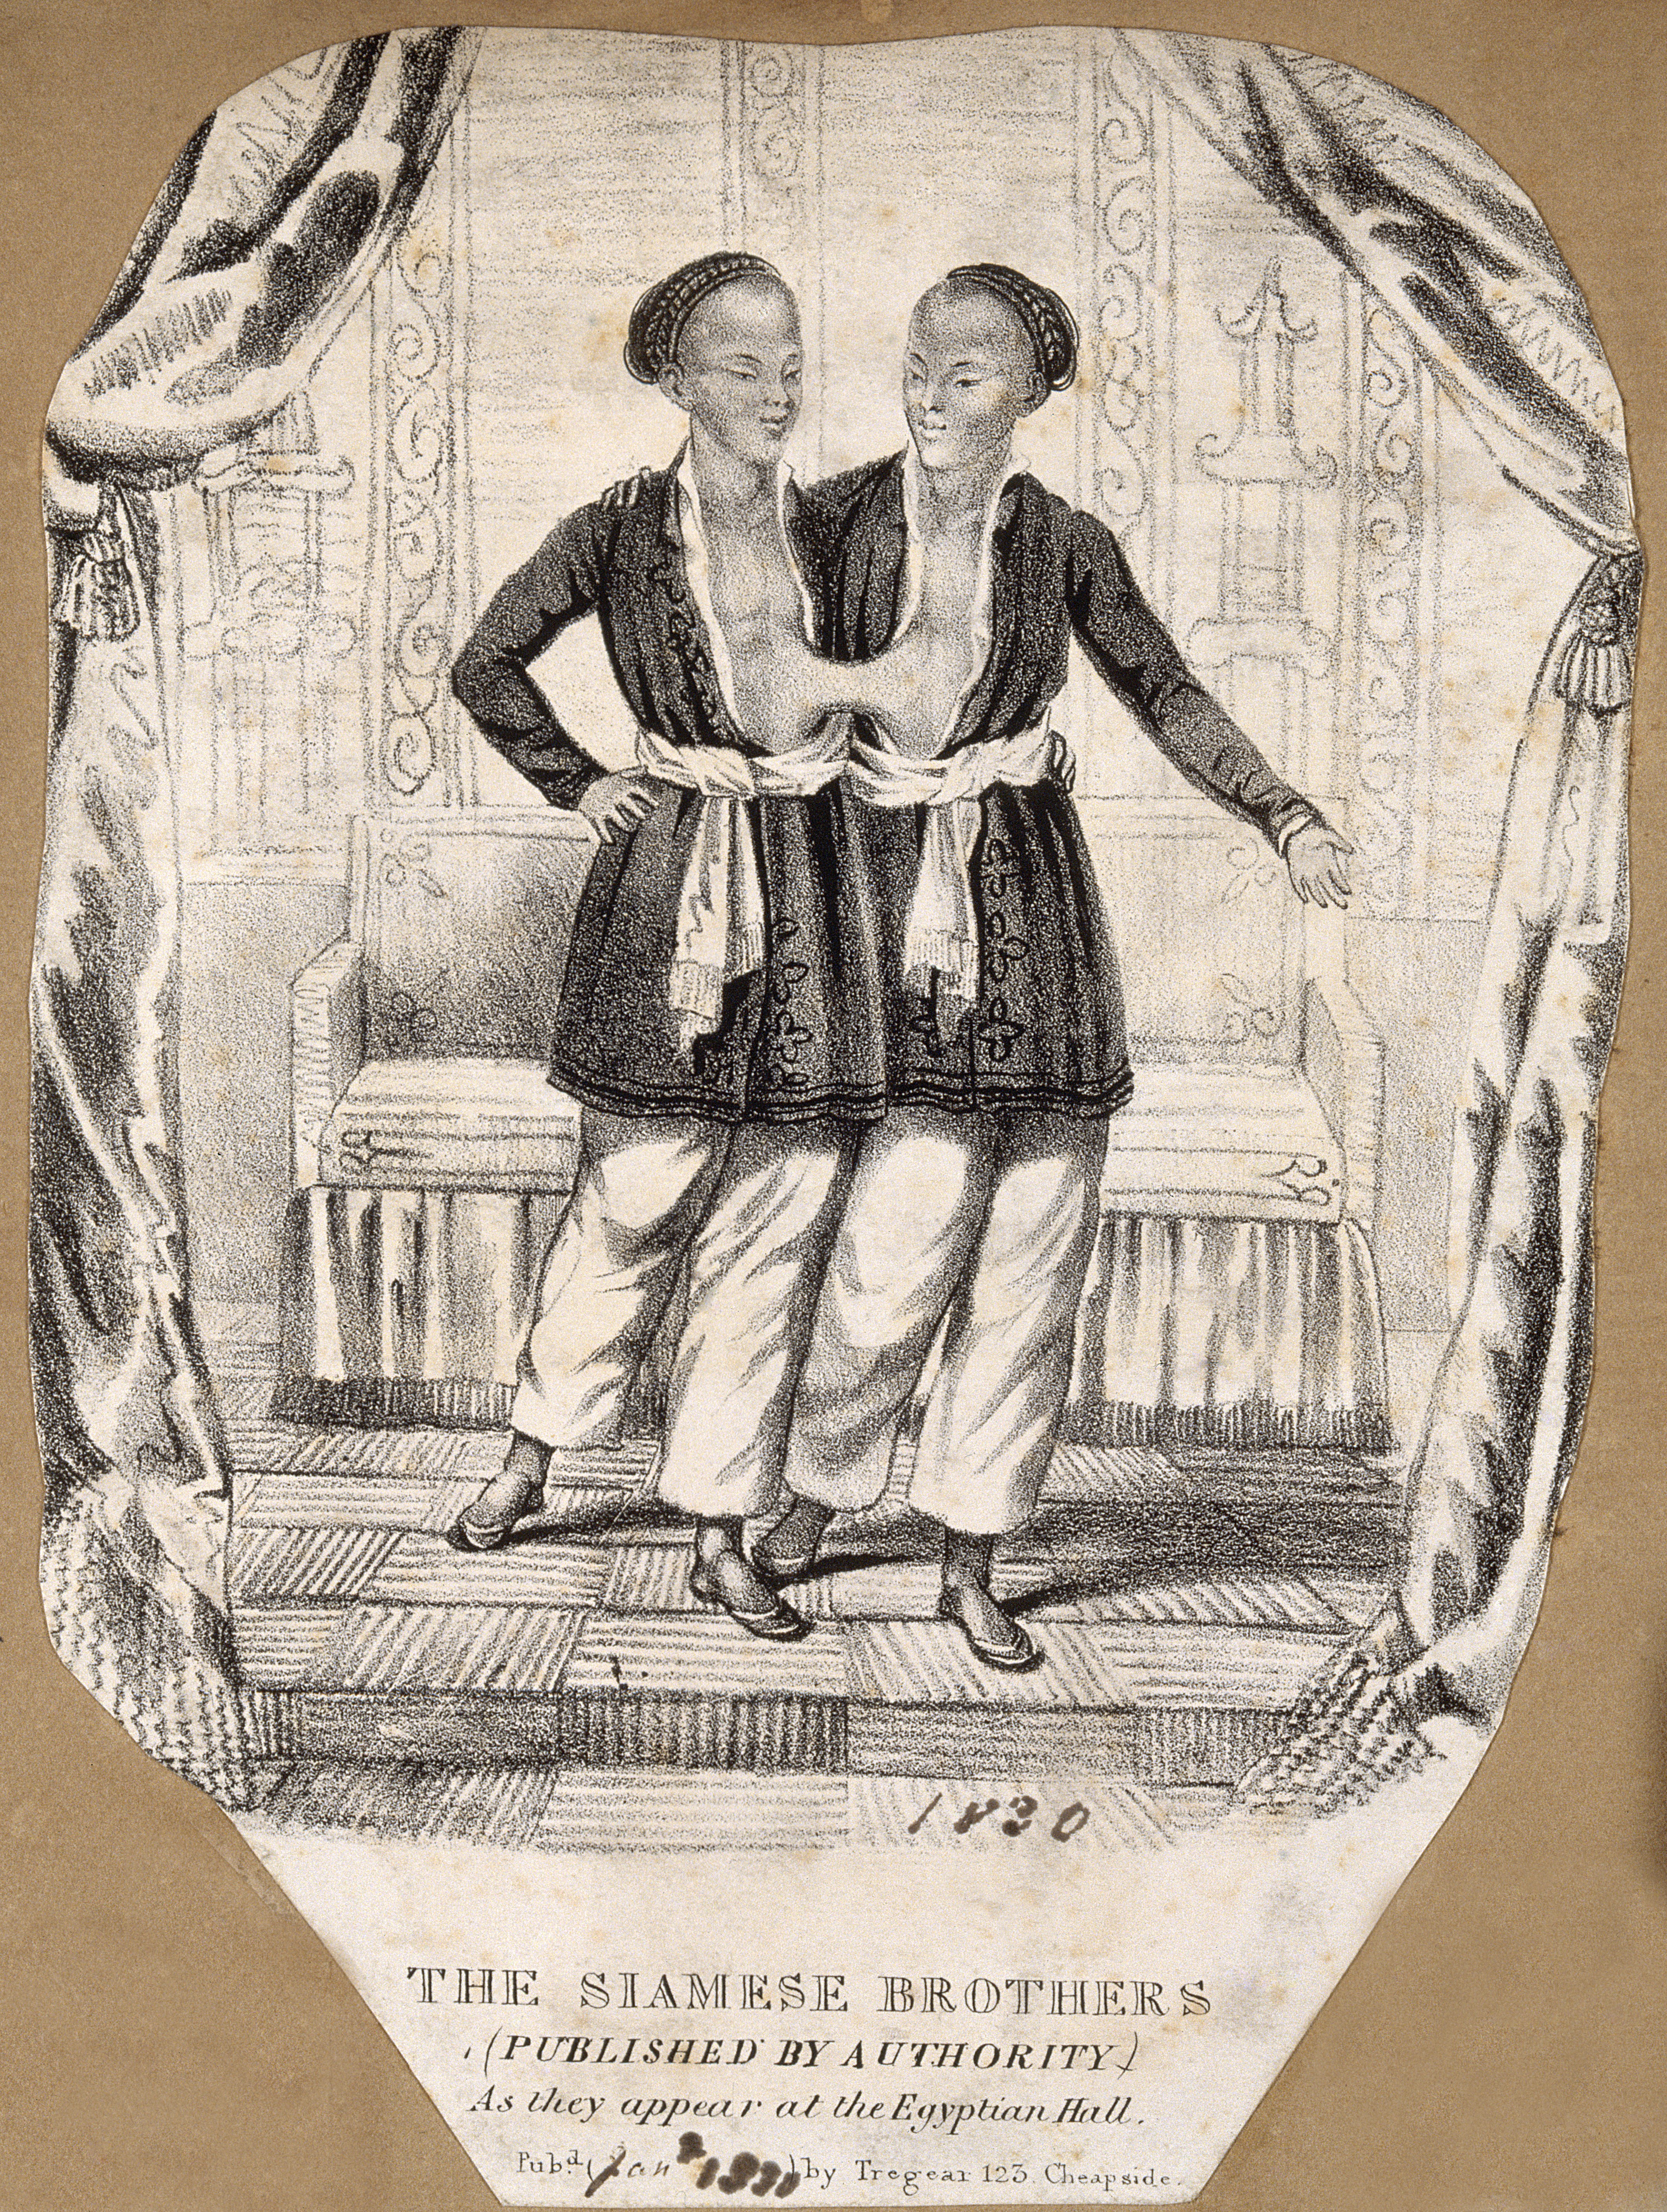 http://upload.wikimedia.org/wikipedia/commons/5/5c/Chang_and_Eng_the_Siamese_twins%2C_in_an_oriental_setting._Lit_Wellcome_V0007370.jpg